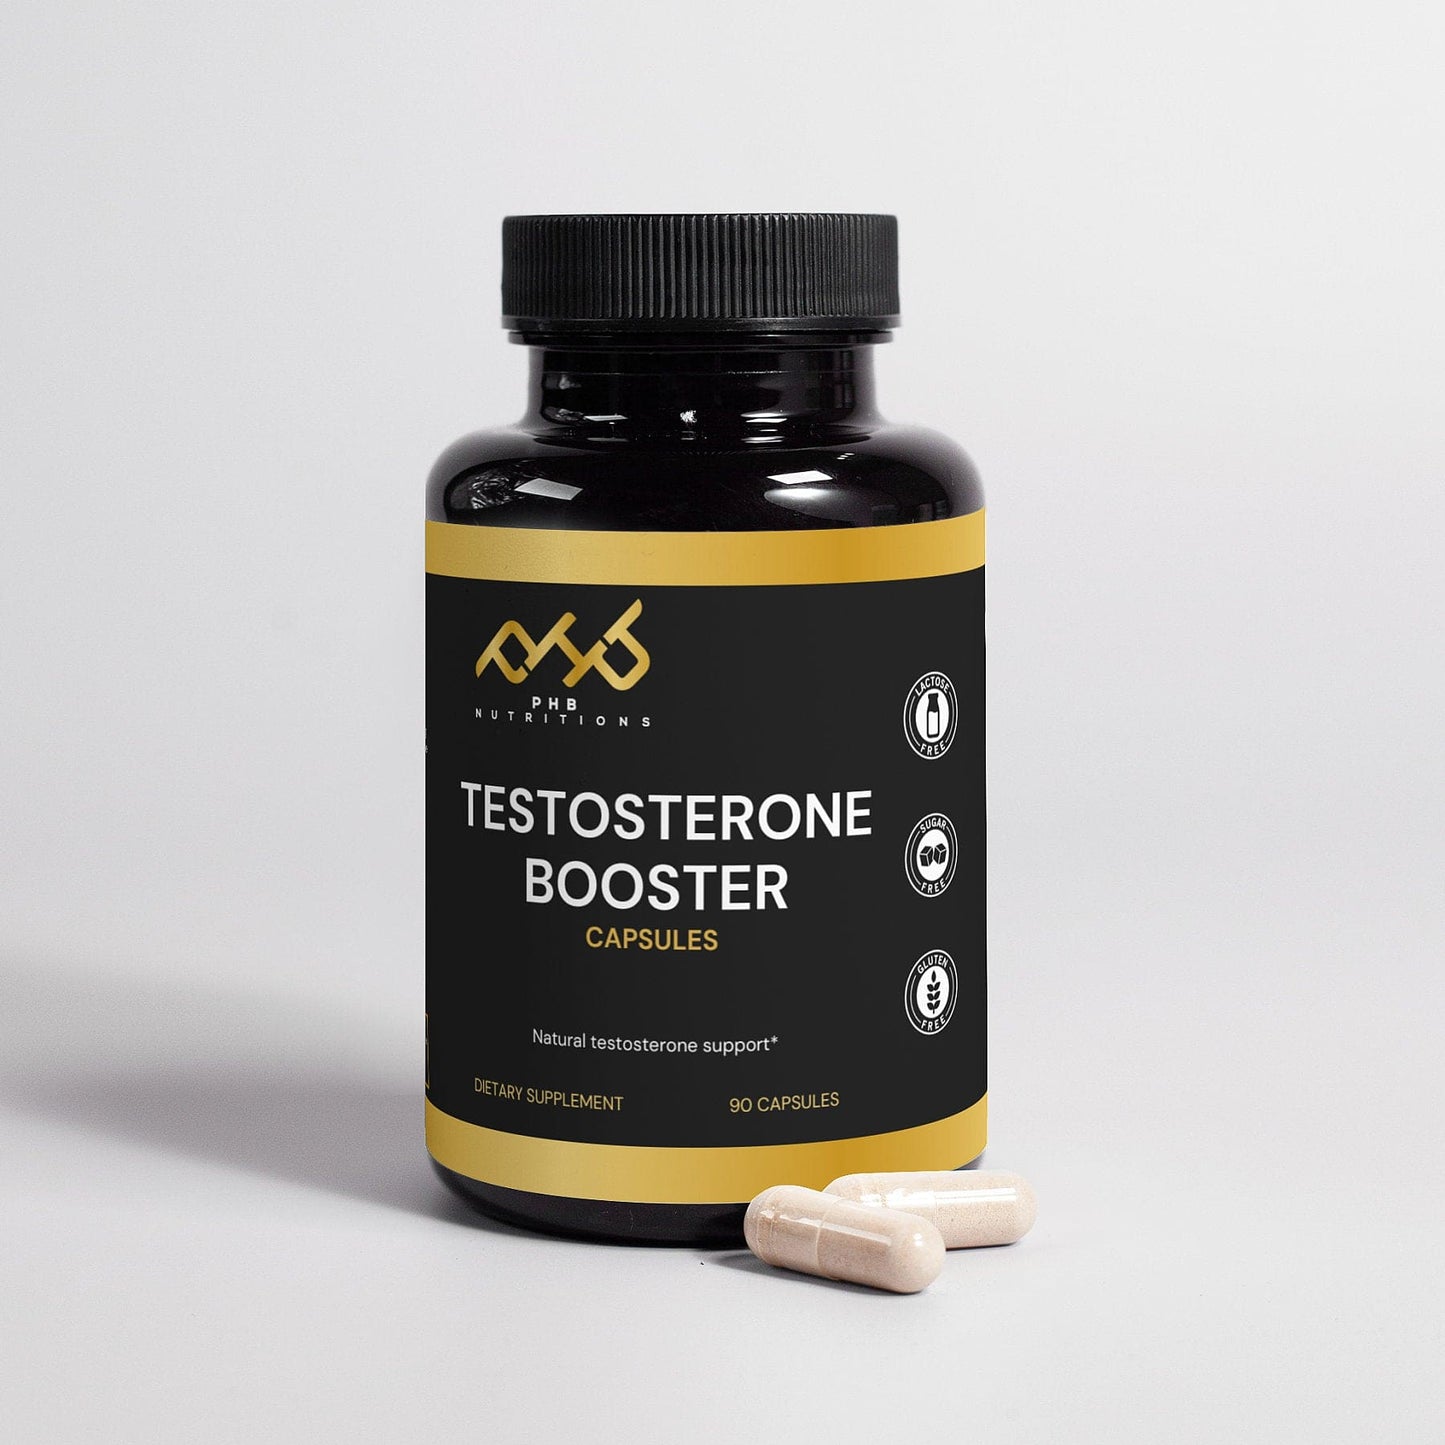 Testosterone Booster - 30 Servings